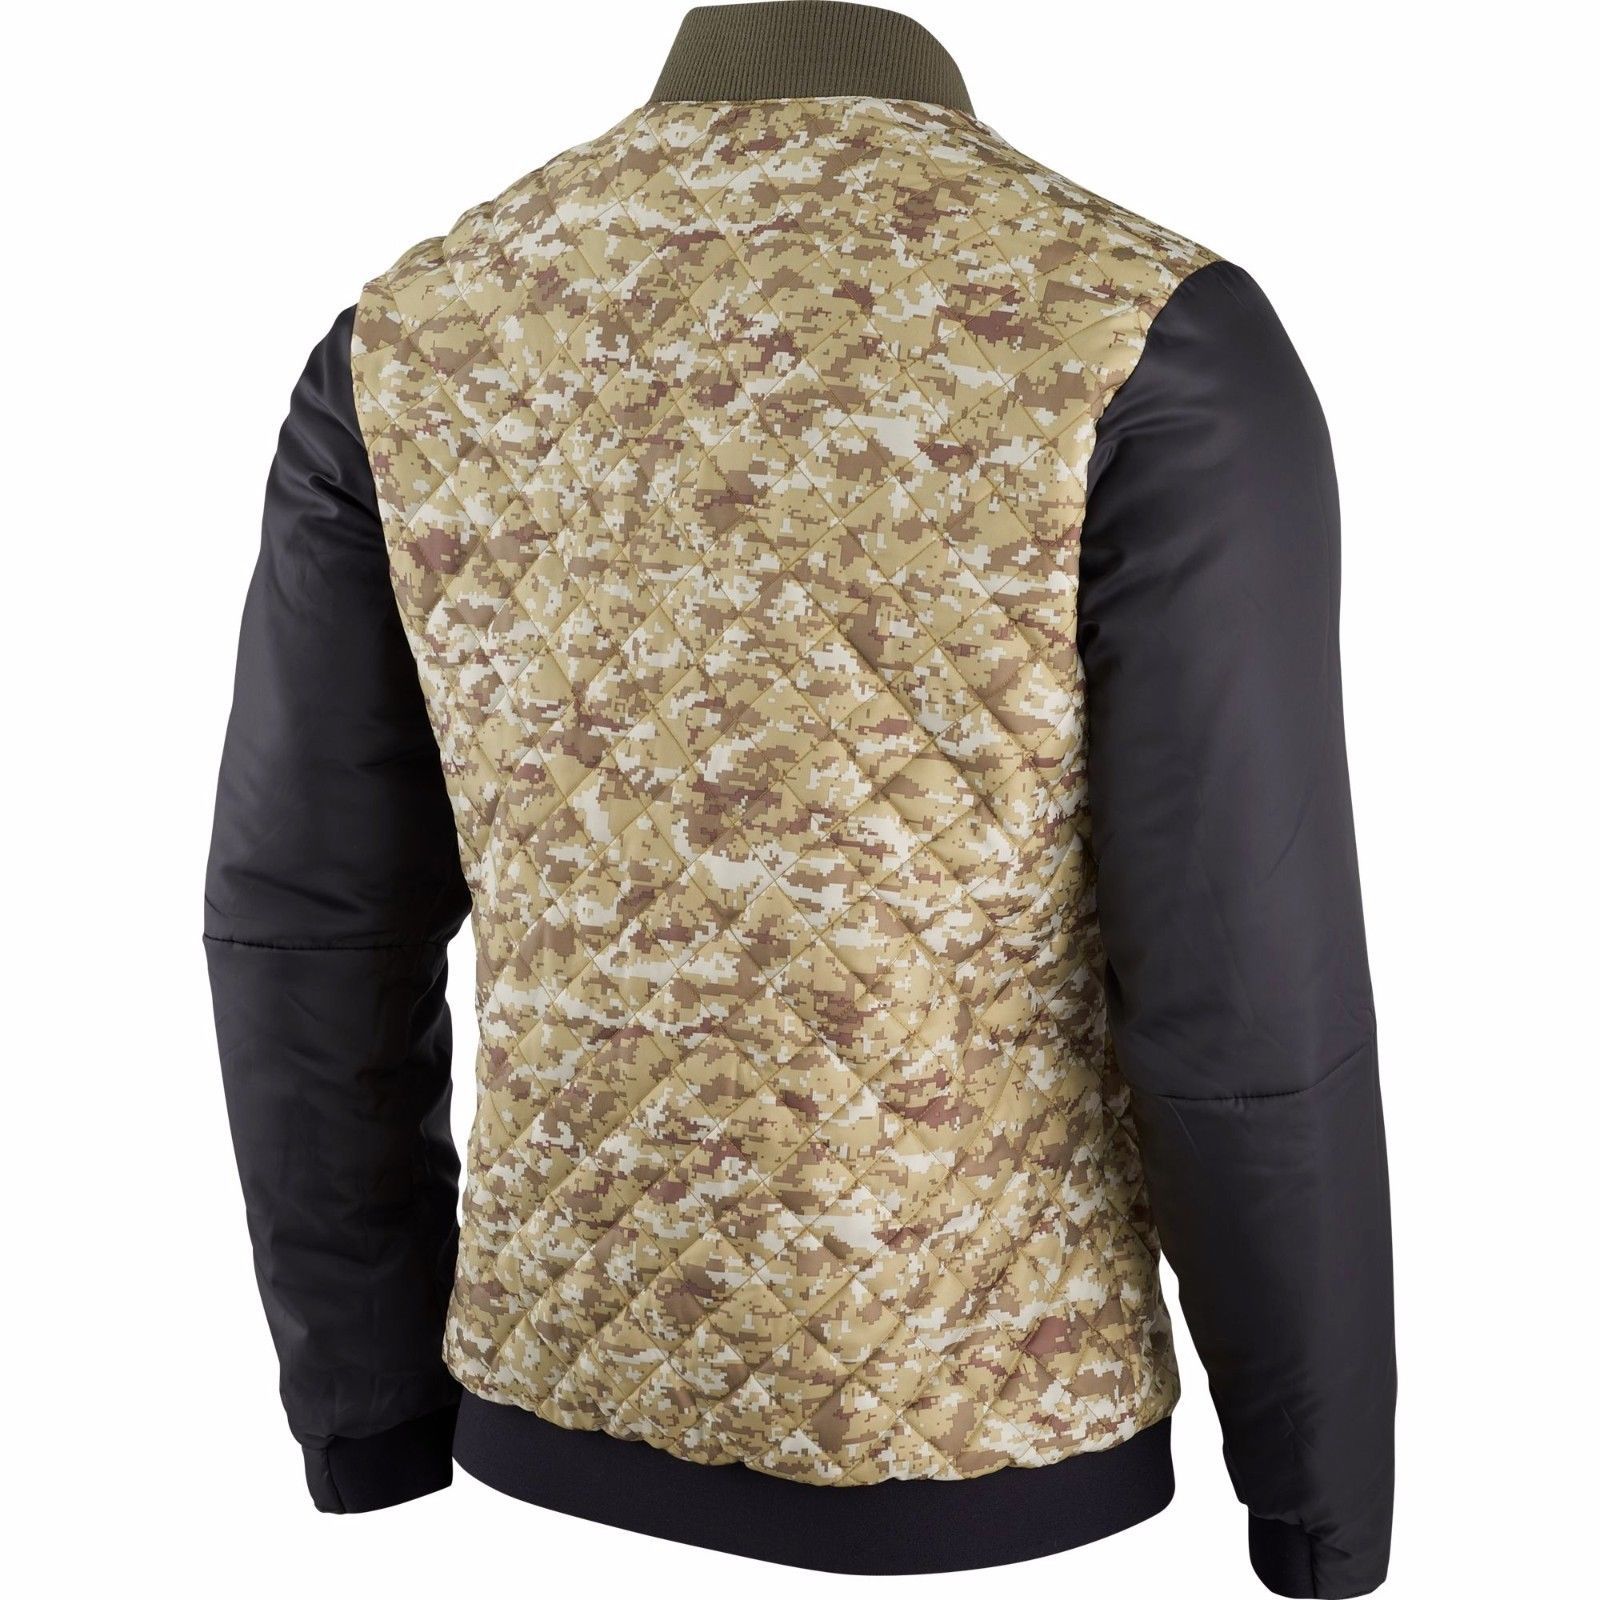 nfl salute to service bomber jacket